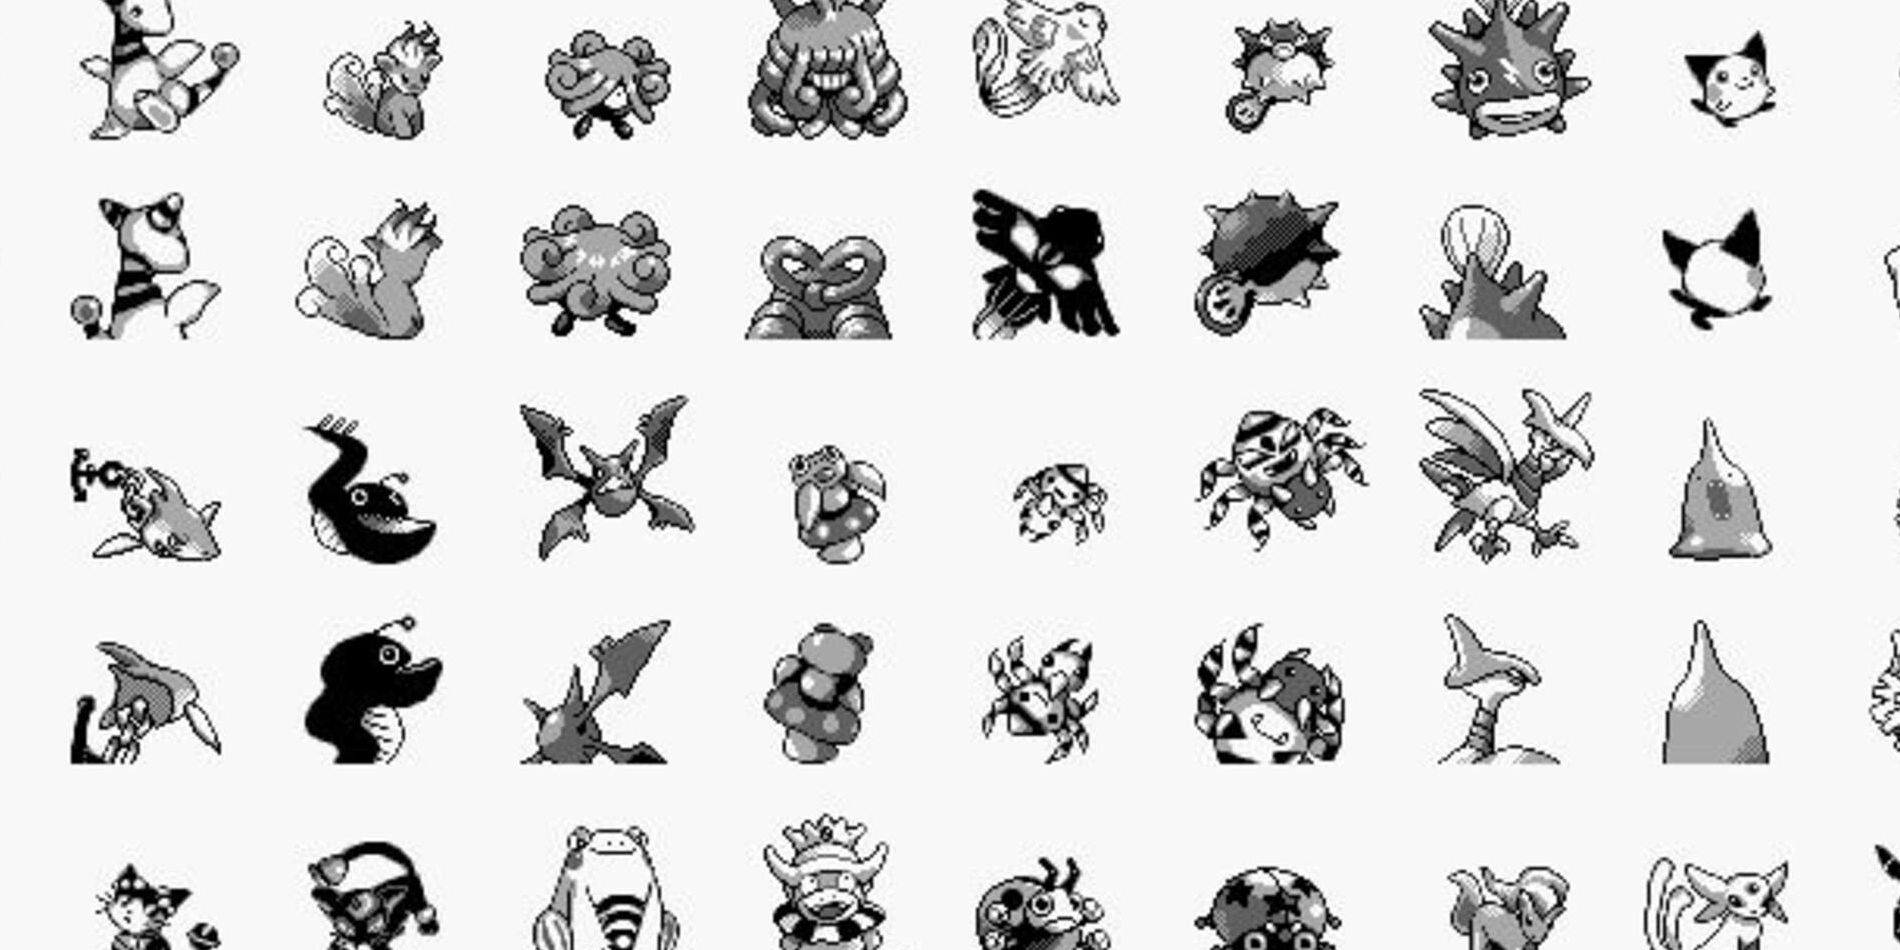 The unused type list as of now. Pokemon future generations and/or